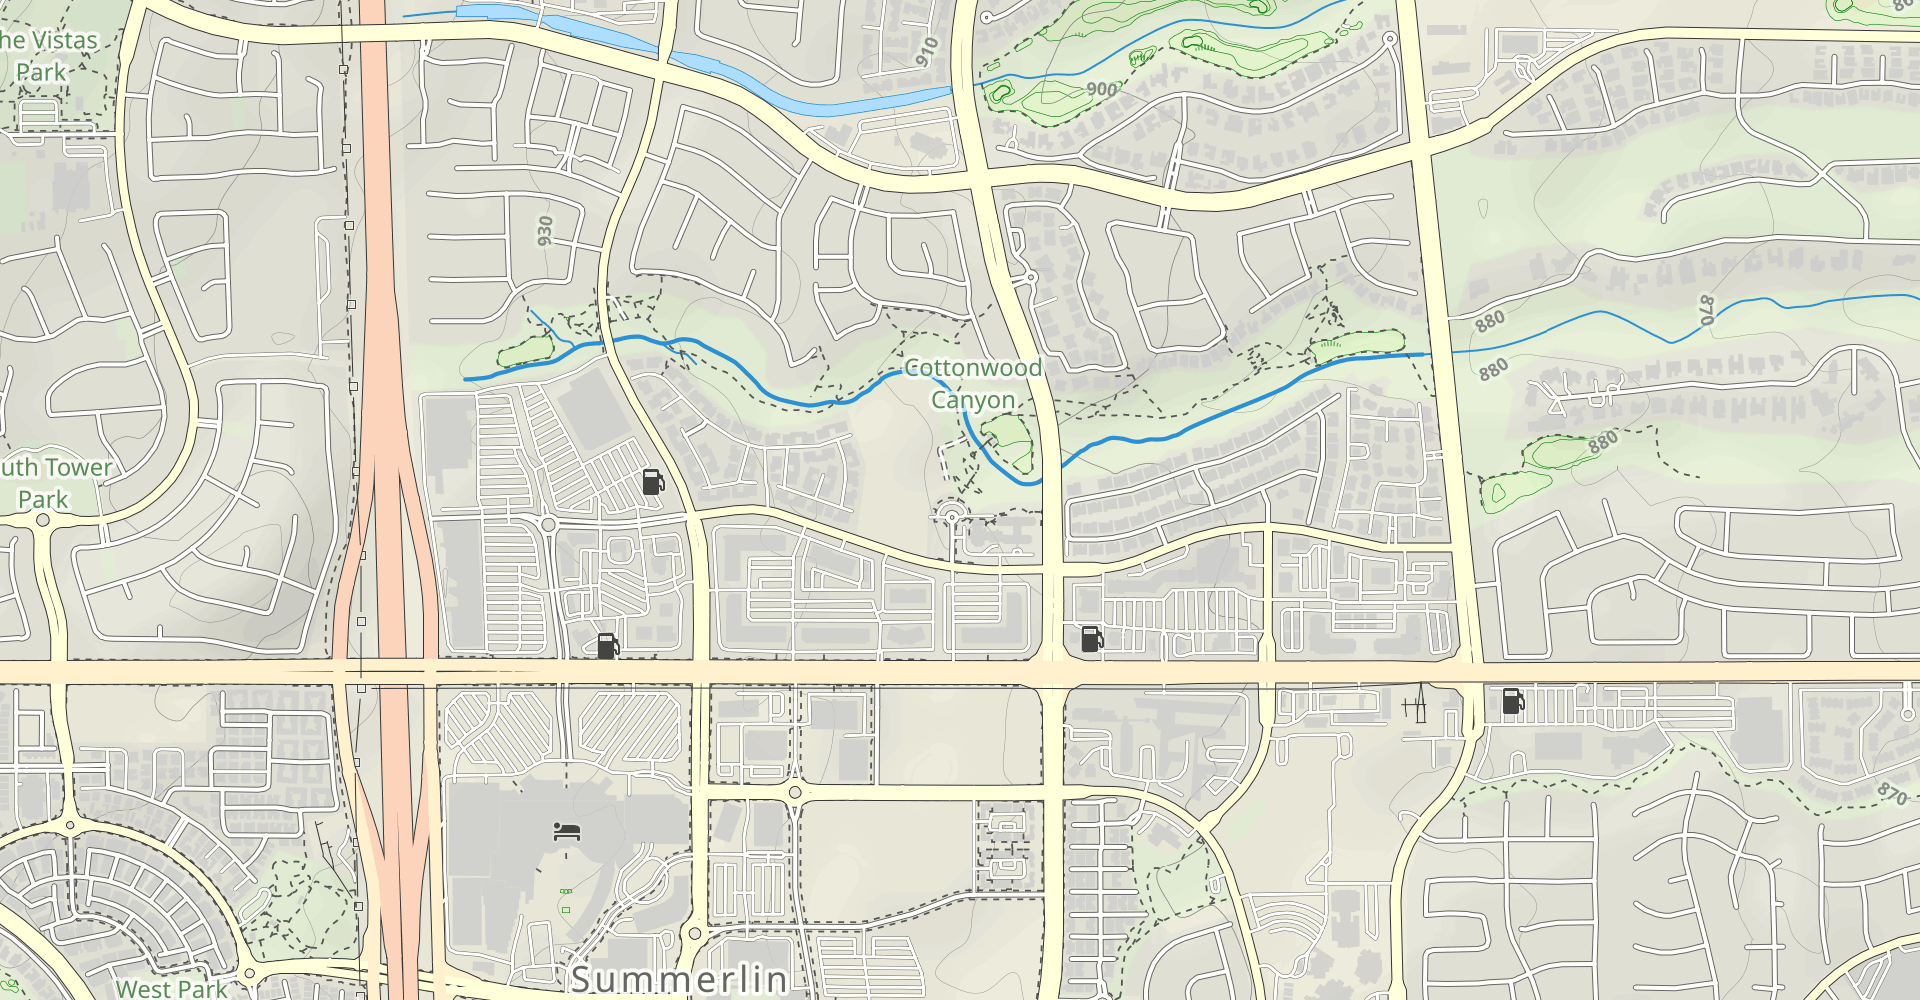 Summerlin Cottonwood Canyon Park Trail